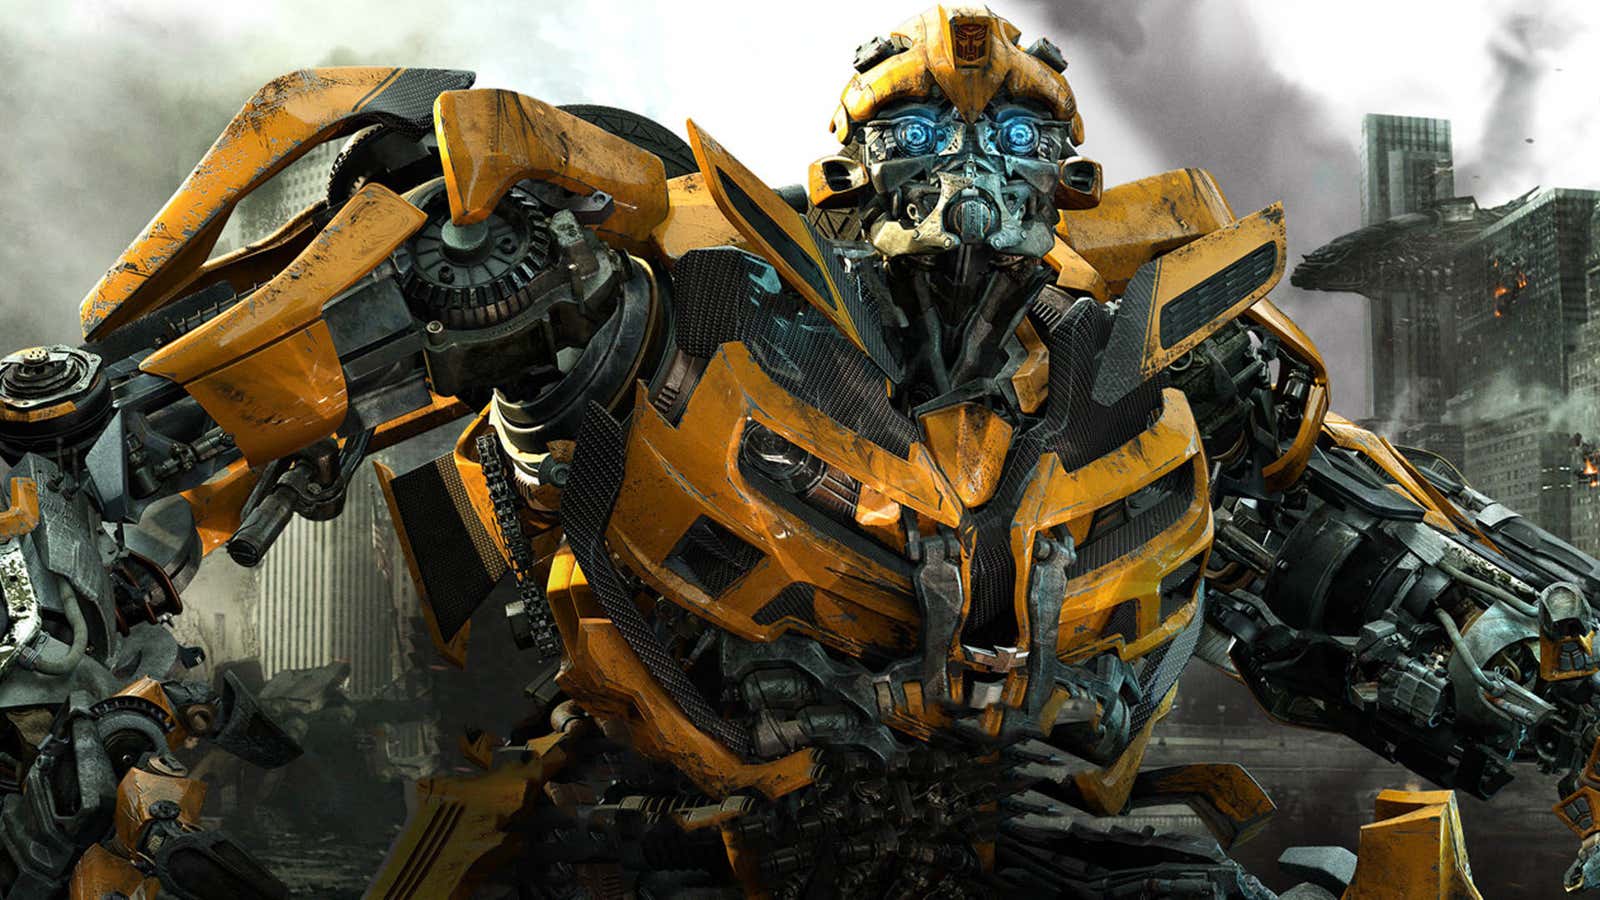 It’s Bumblebee’s time to shine.